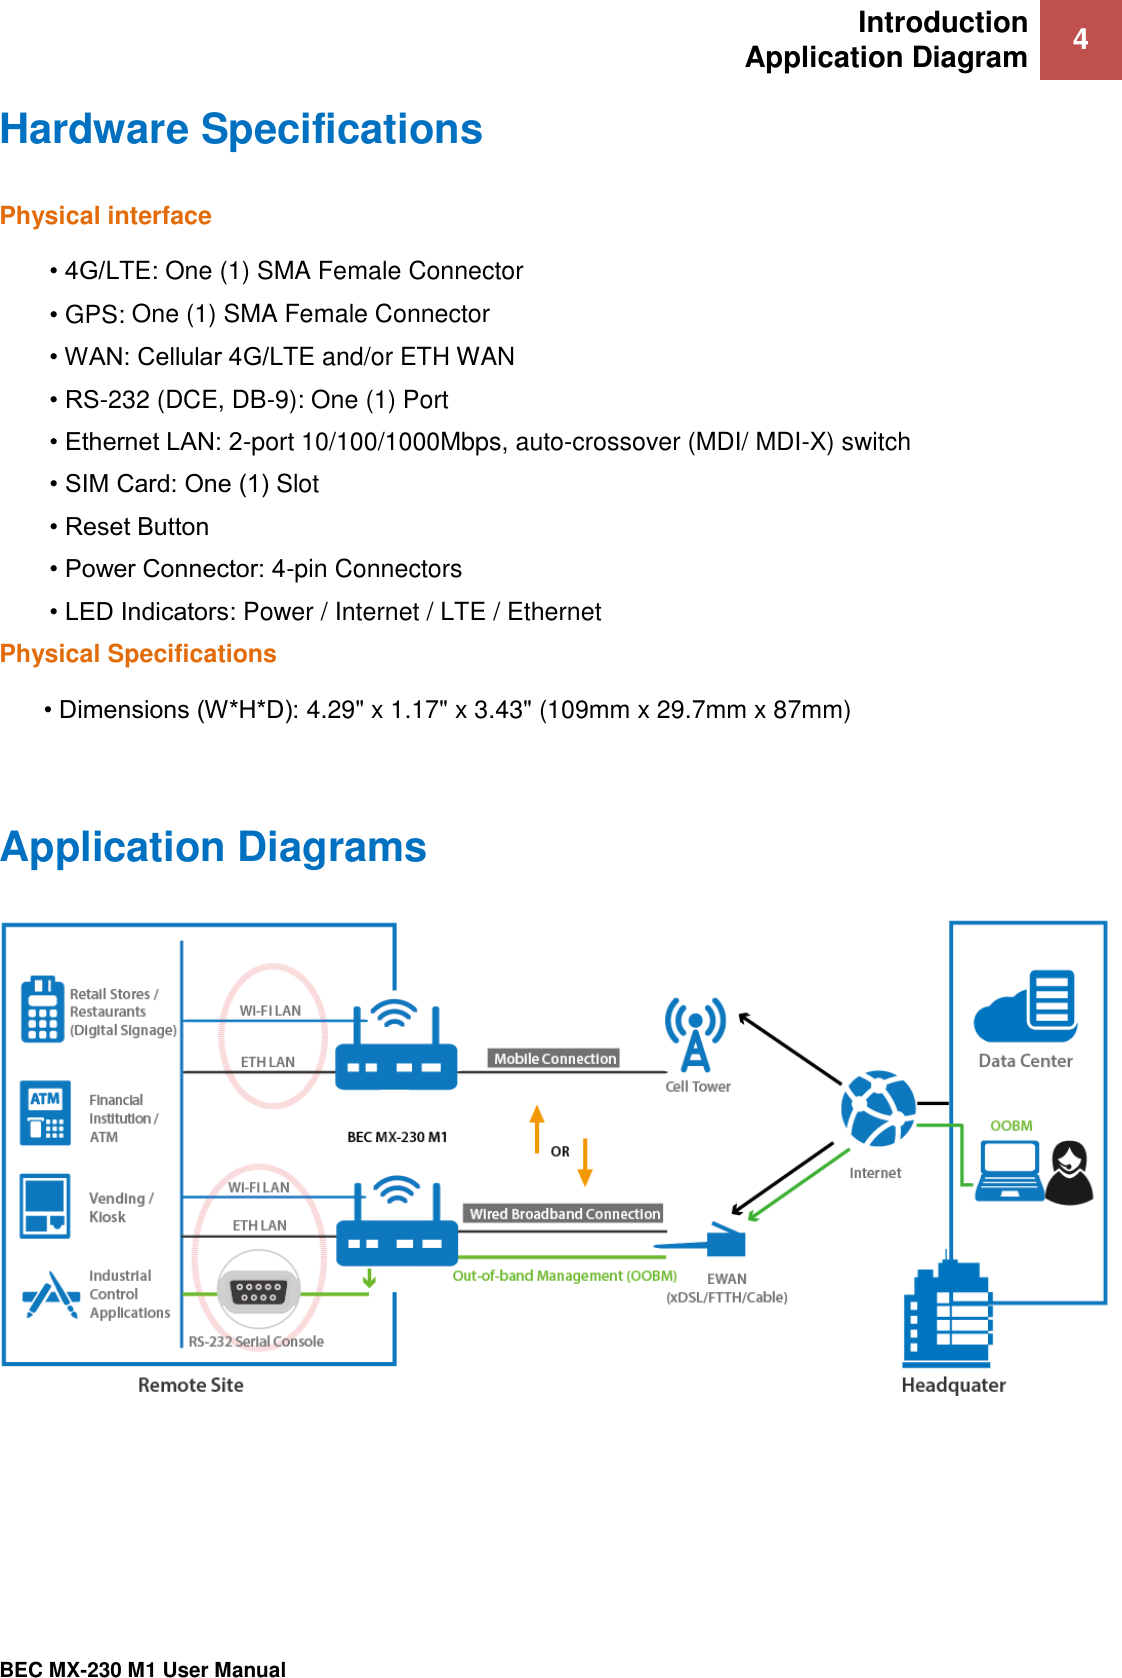 Introduction Application Diagram 4   BEC MX-230 M1 User Manual  Hardware Specifications Physical interface • 4G/LTE: One (1) SMA Female Connector • GPS: One (1) SMA Female Connector • WAN: Cellular 4G/LTE and/or ETH WAN • RS-232 (DCE, DB-9): One (1) Port • Ethernet LAN: 2-port 10/100/1000Mbps, auto-crossover (MDI/ MDI-X) switch • SIM Card: One (1) Slot • Reset Button • Power Connector: 4-pin Connectors • LED Indicators: Power / Internet / LTE / Ethernet Physical Specifications • Dimensions (W*H*D): 4.29&quot; x 1.17&quot; x 3.43&quot; (109mm x 29.7mm x 87mm)   Application Diagrams 